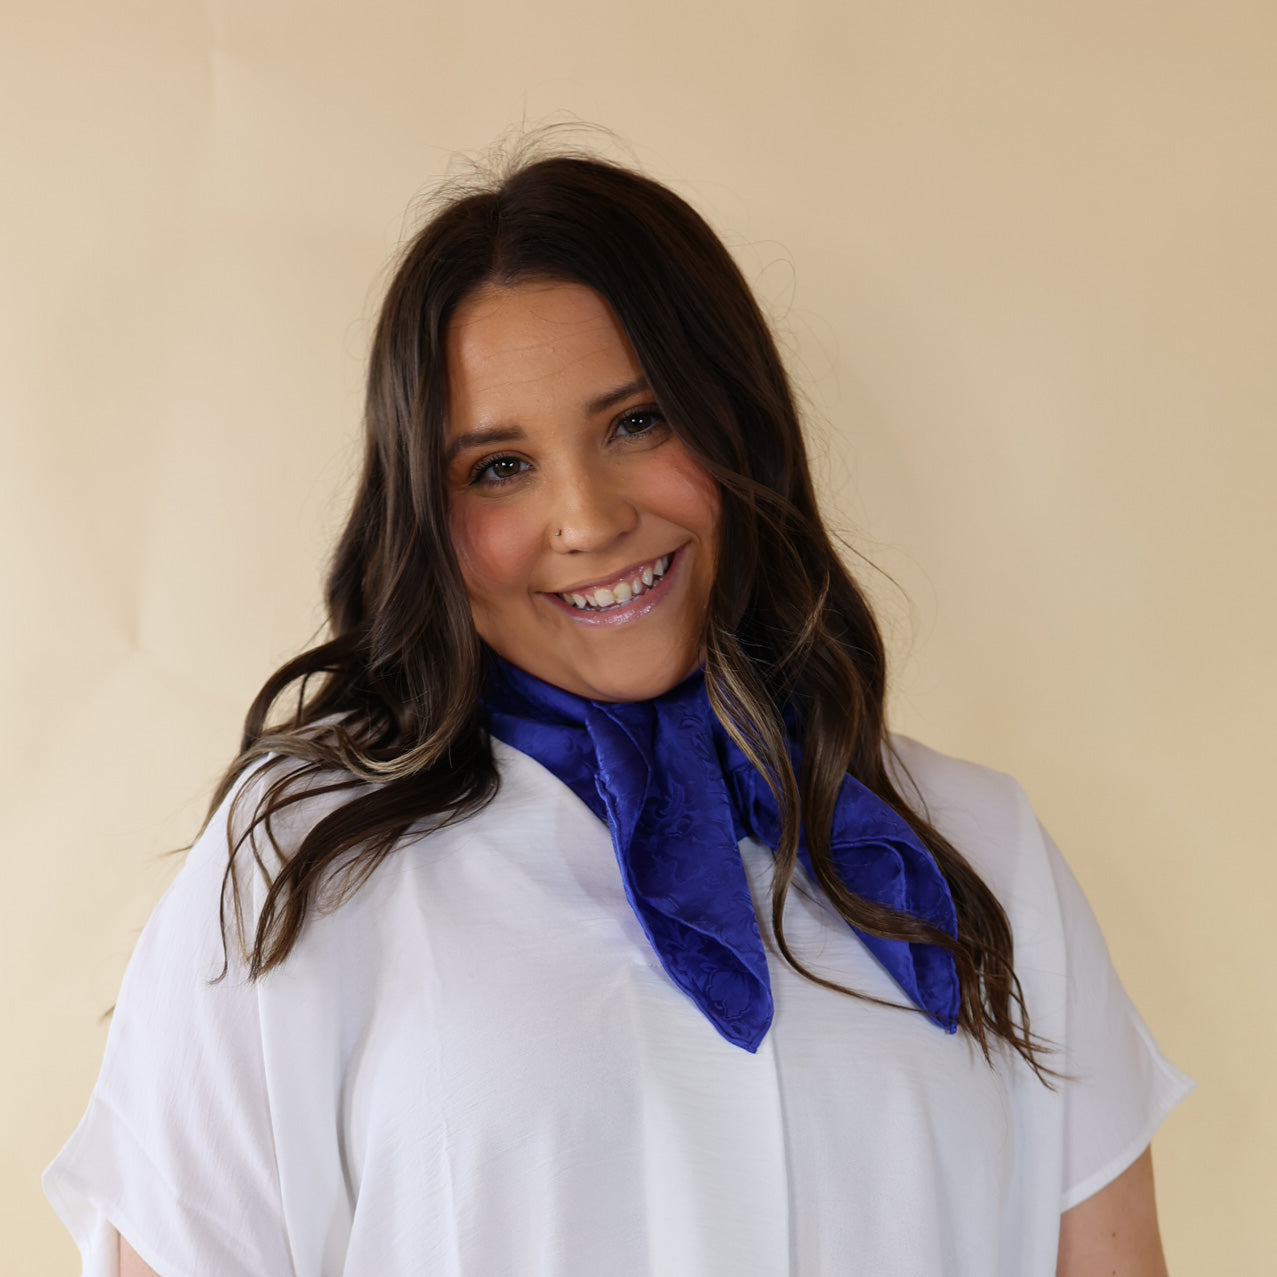 Brunette model is pictured wearing a white, Drop shoulder top with a solid blue scarf tied around her neck. Model is pictured in front of a beige background.